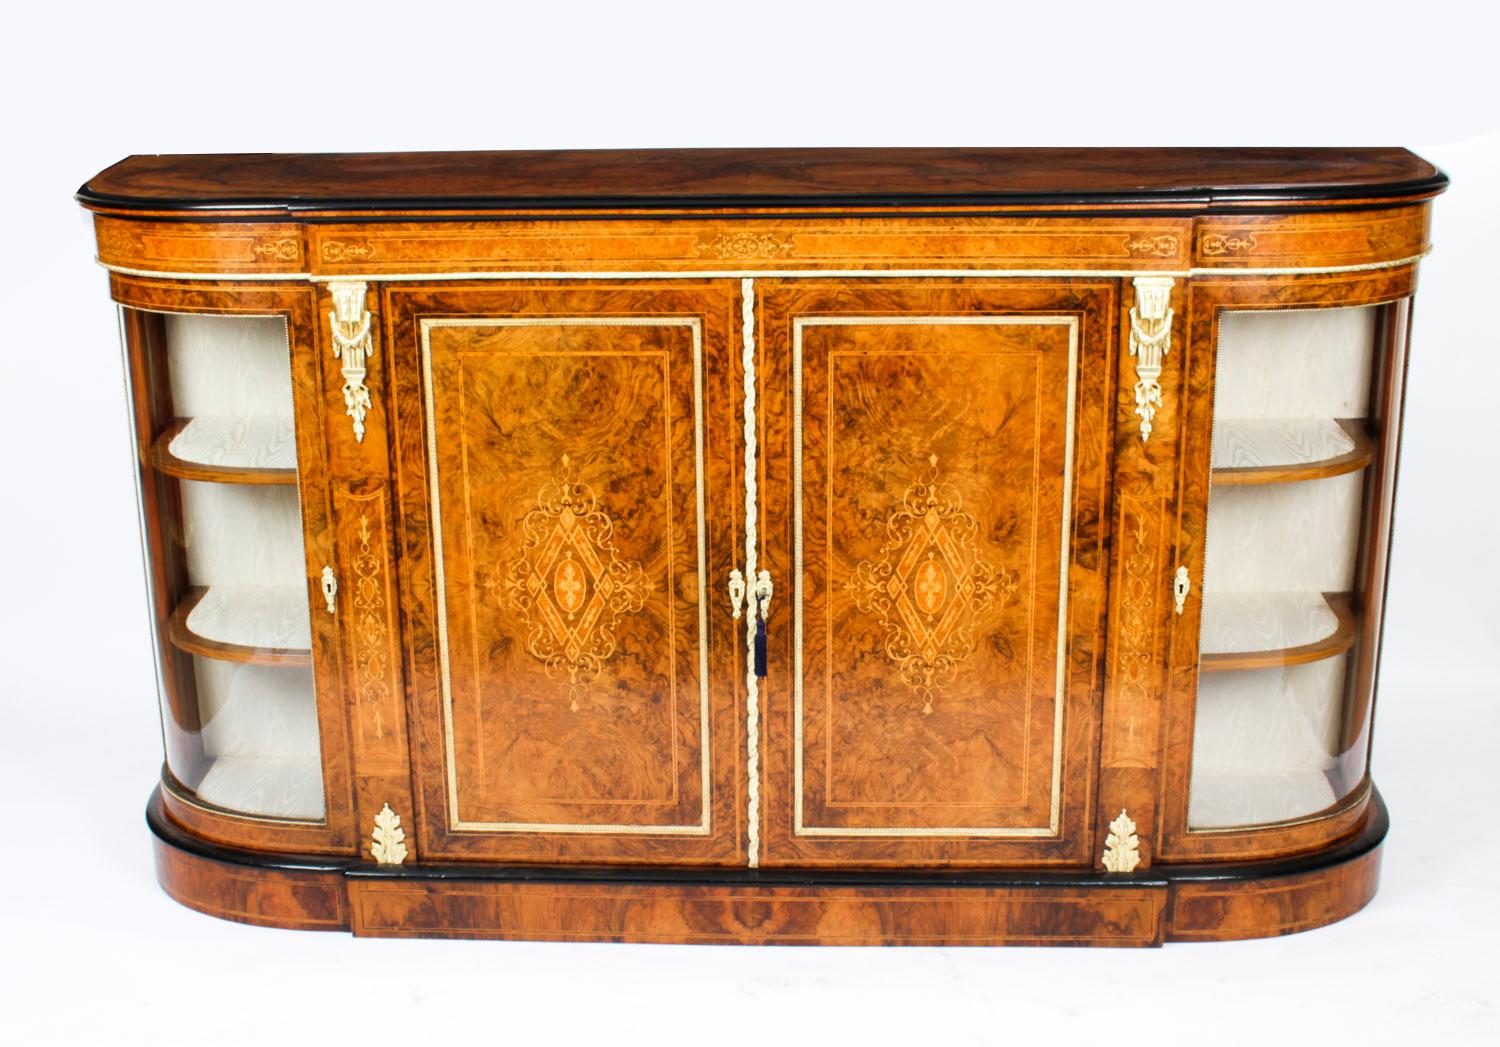 This is a stunning antique Victorian burr walnut, marquetry inlaid and ormolu mounted credenza, circa 1880 in date.

The entire piece highlights the unique and truly exceptional pattern of the burr walnut extremely well and the walnut is